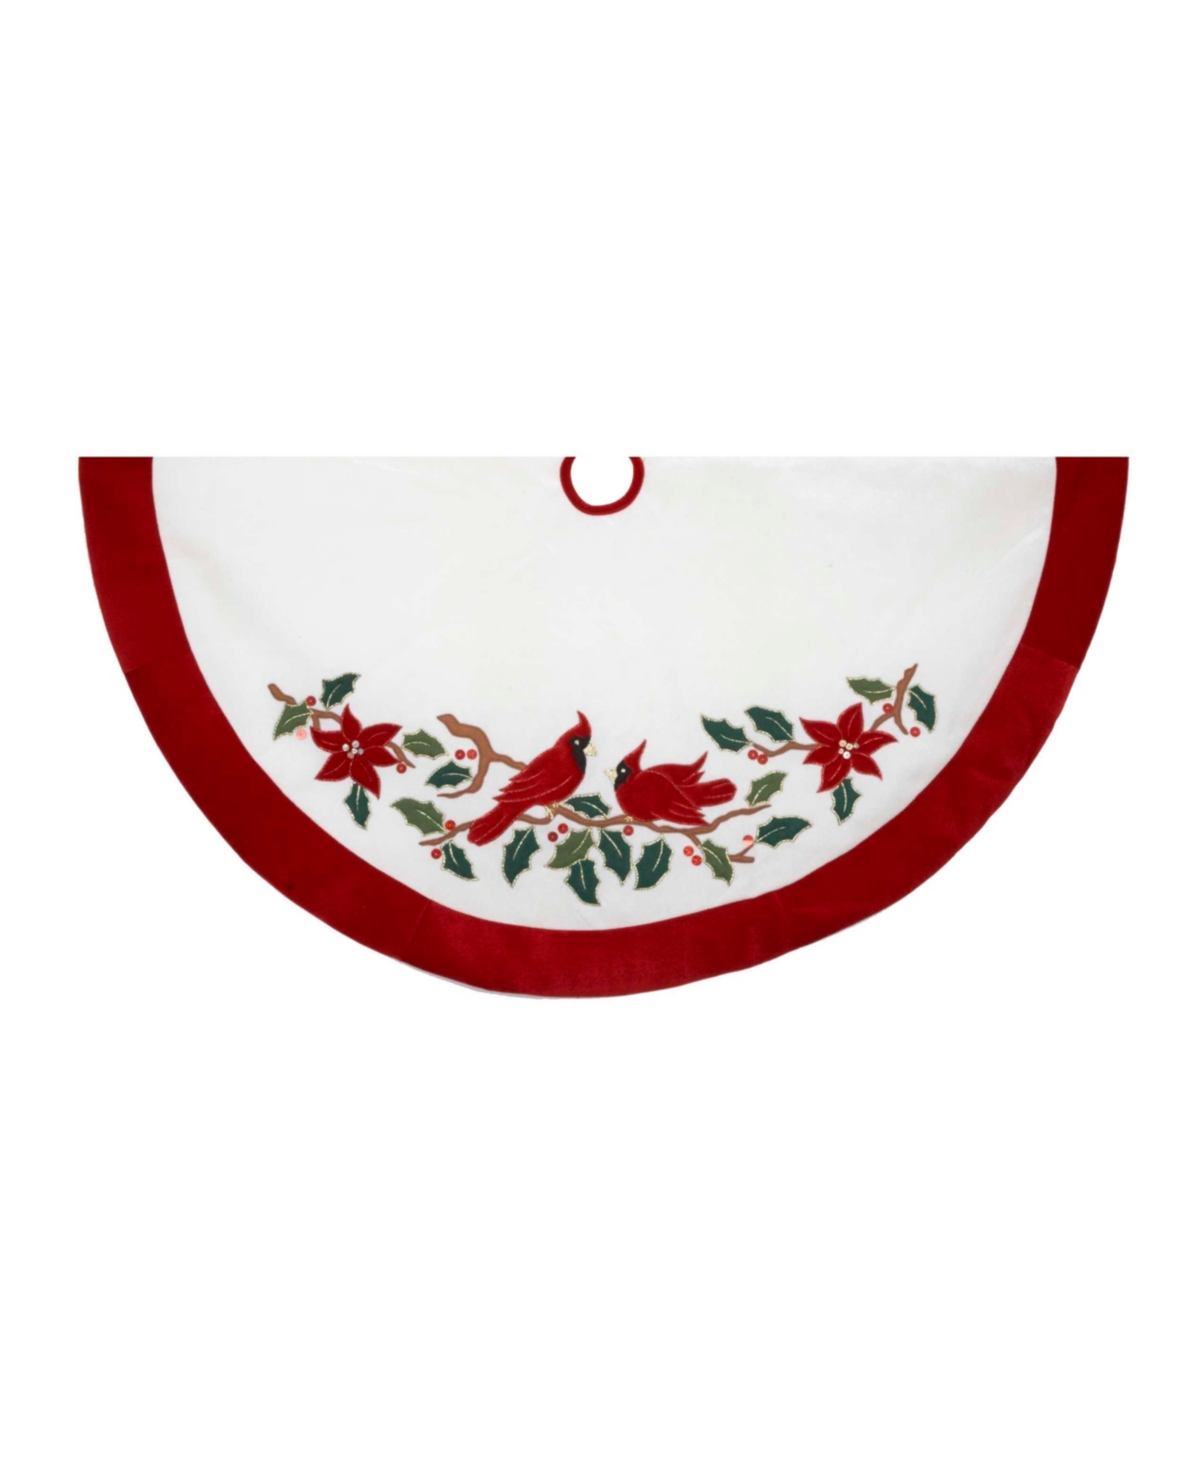 UPC 086131206894 product image for Kurt Adler 48-Inch Velvet Red and White with Cardinals Applique Tree skirt | upcitemdb.com